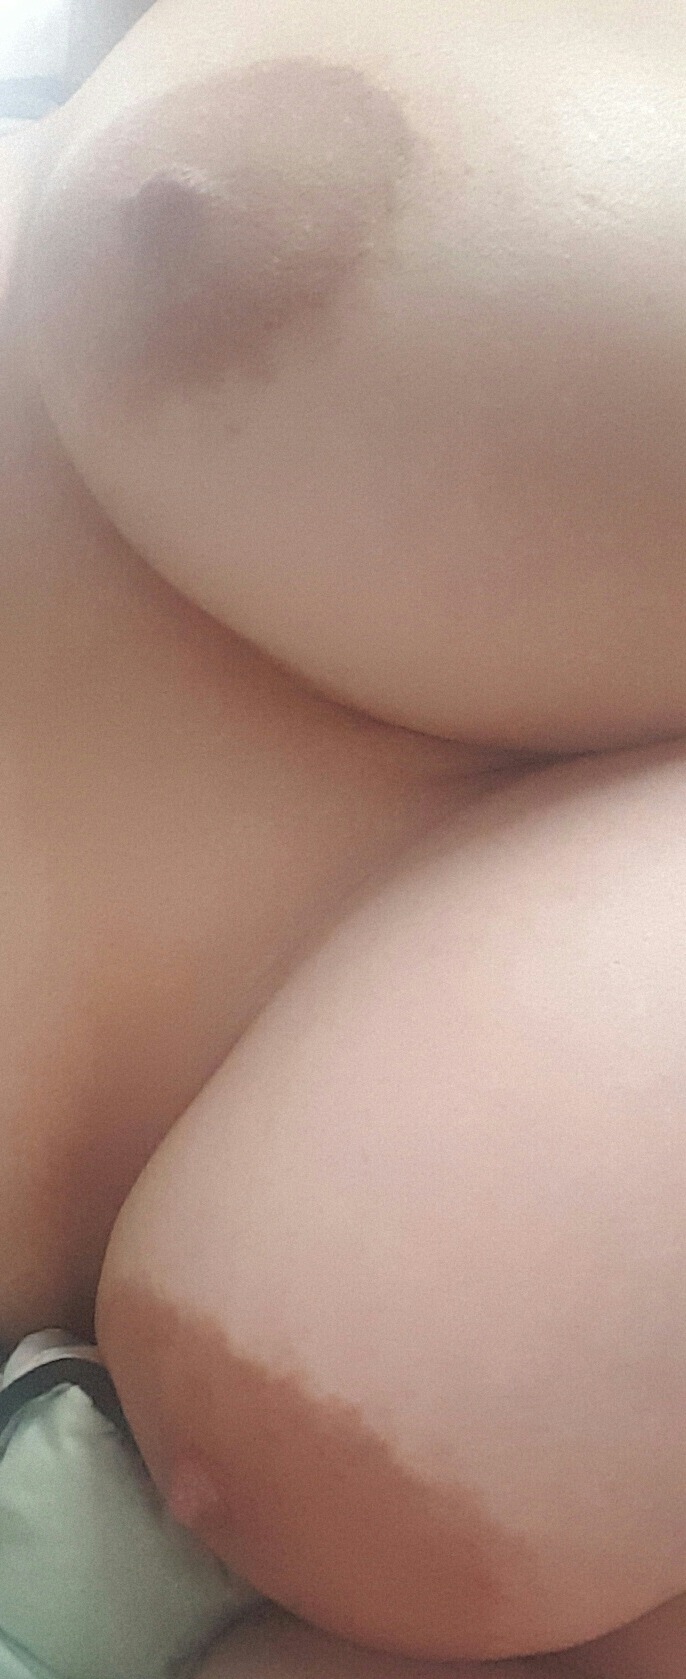 peachybootybabes: Good morning, lovers xx  Some up close and personals 💋 